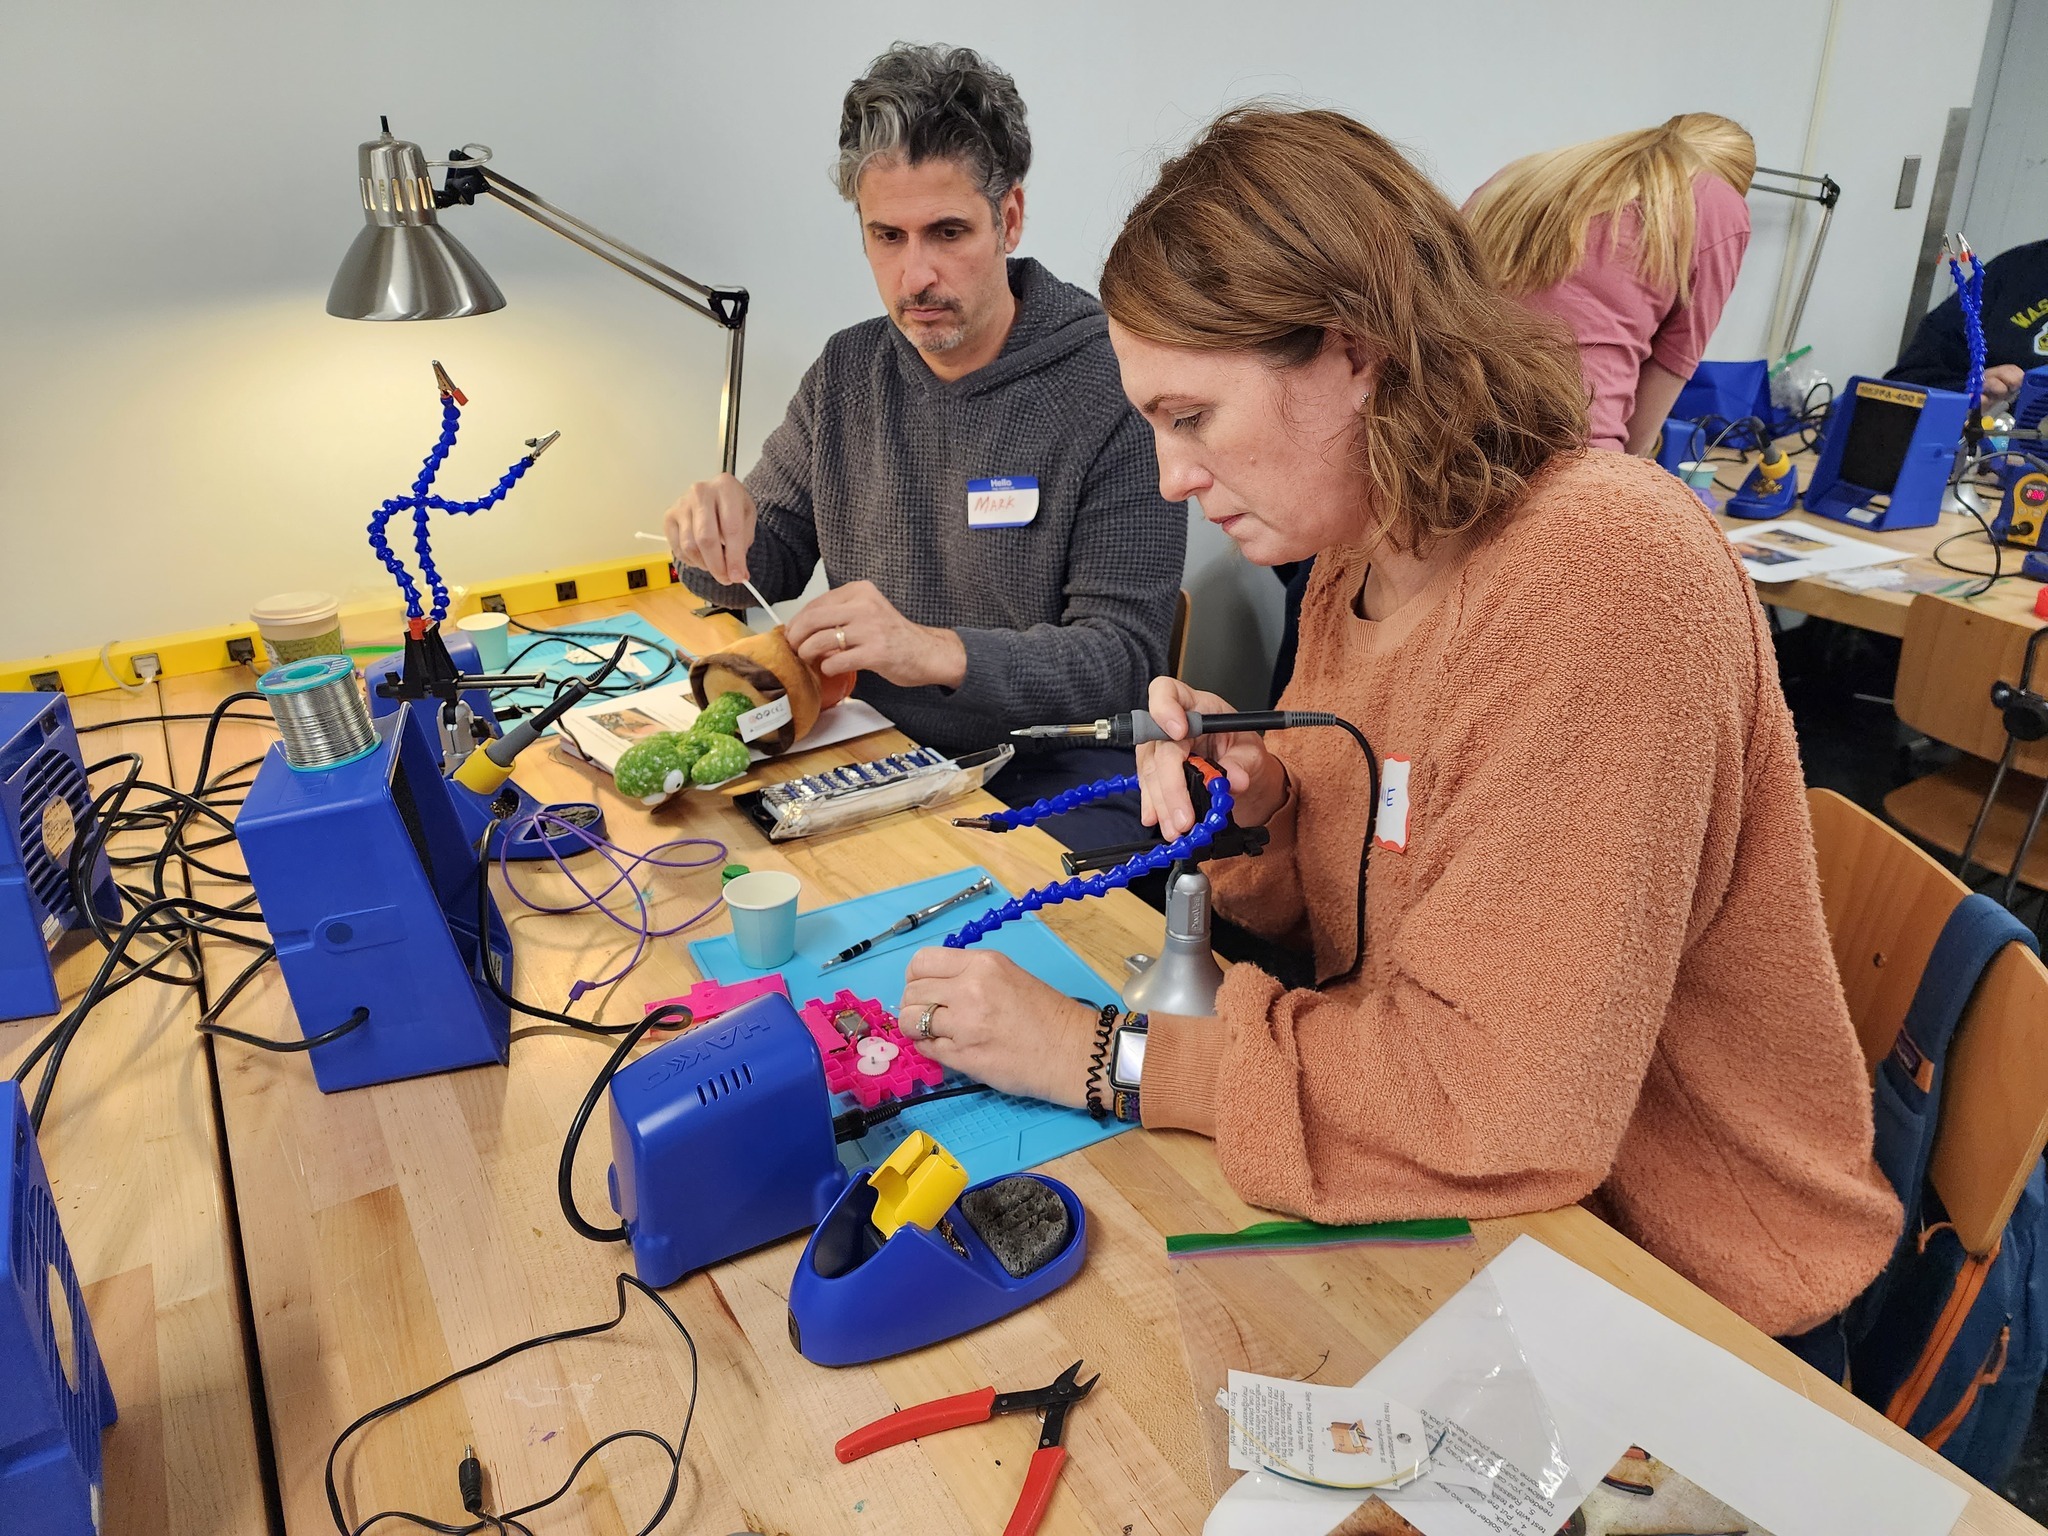 Two individuals sit at a table and modify toys using various tools